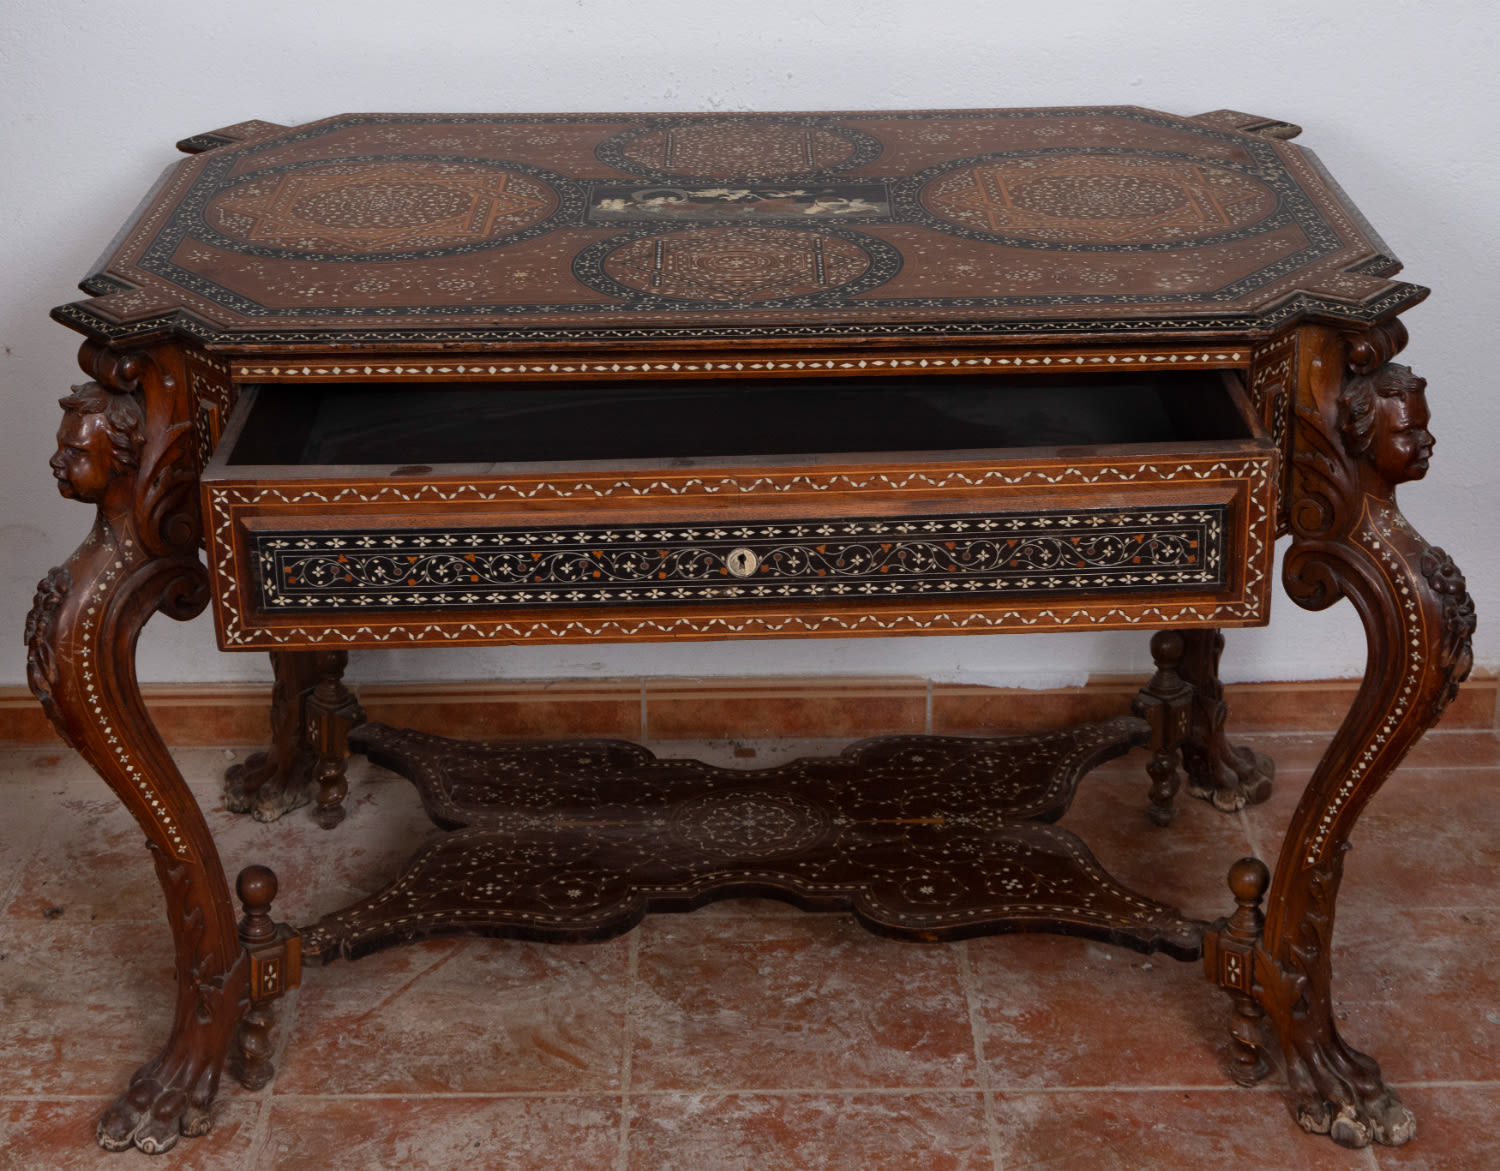 Beautiful table with drawer, made of copper, ebony and mother-of-pearl with bone inlays, 19th centur - Image 4 of 5